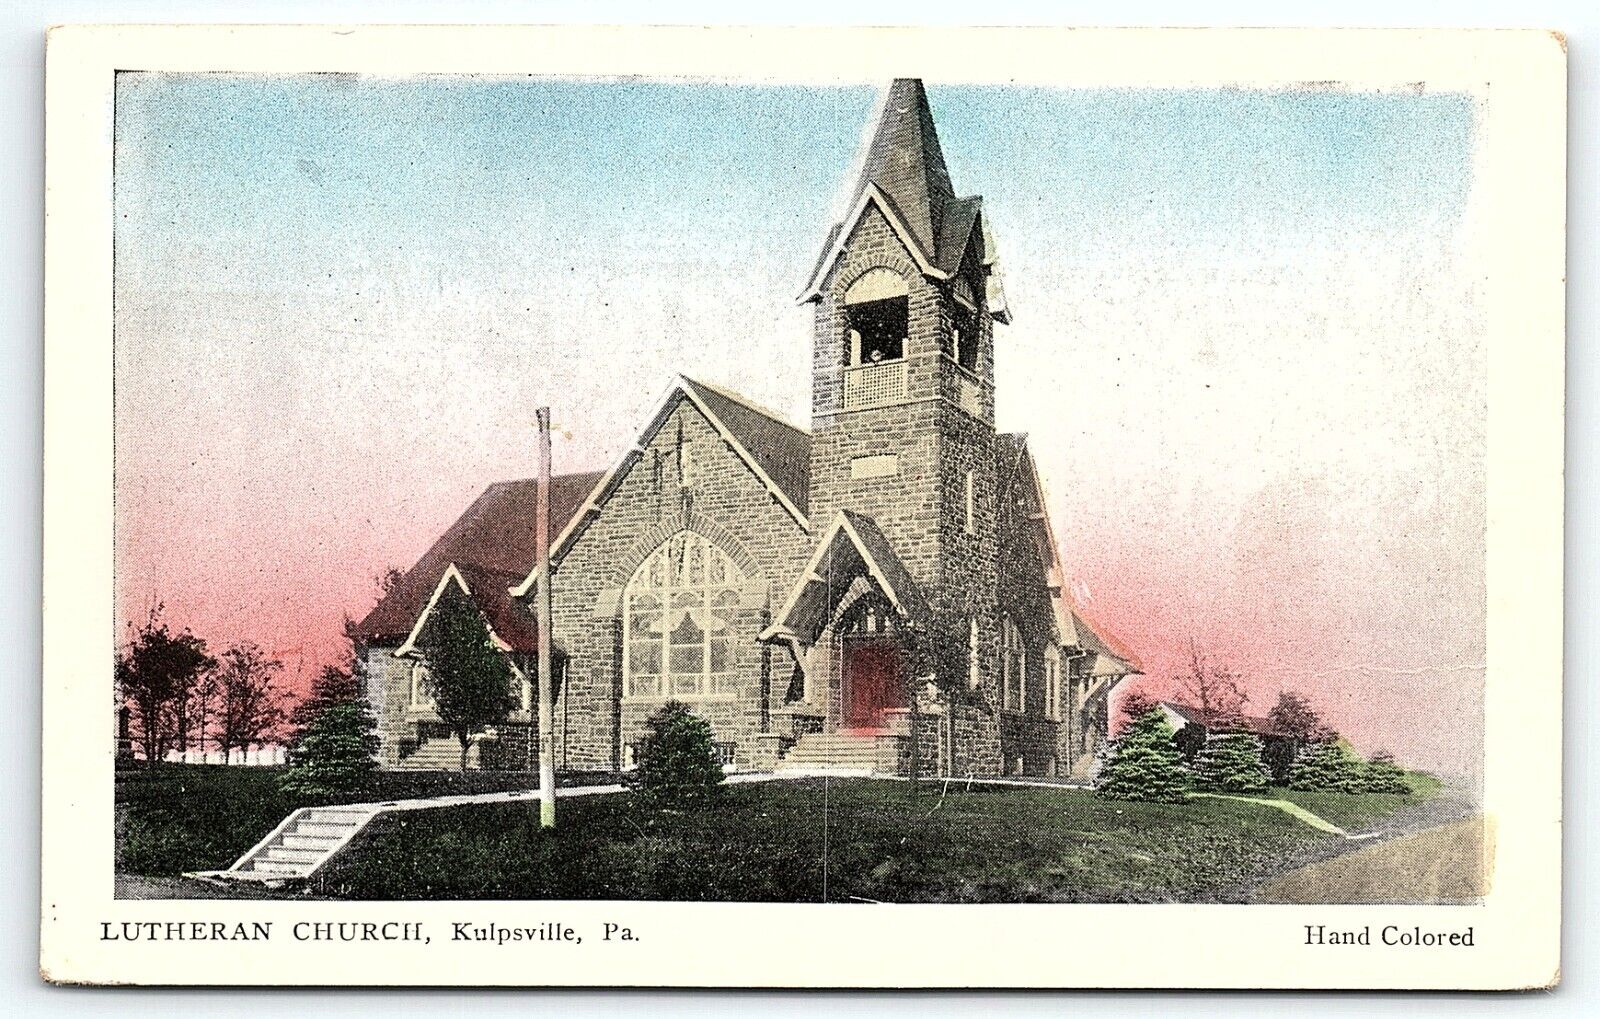 c1920 KULPSVILLE PA LUTHERAN CHURCH HAND COLORED UNPOSTED POSTCARD P4108